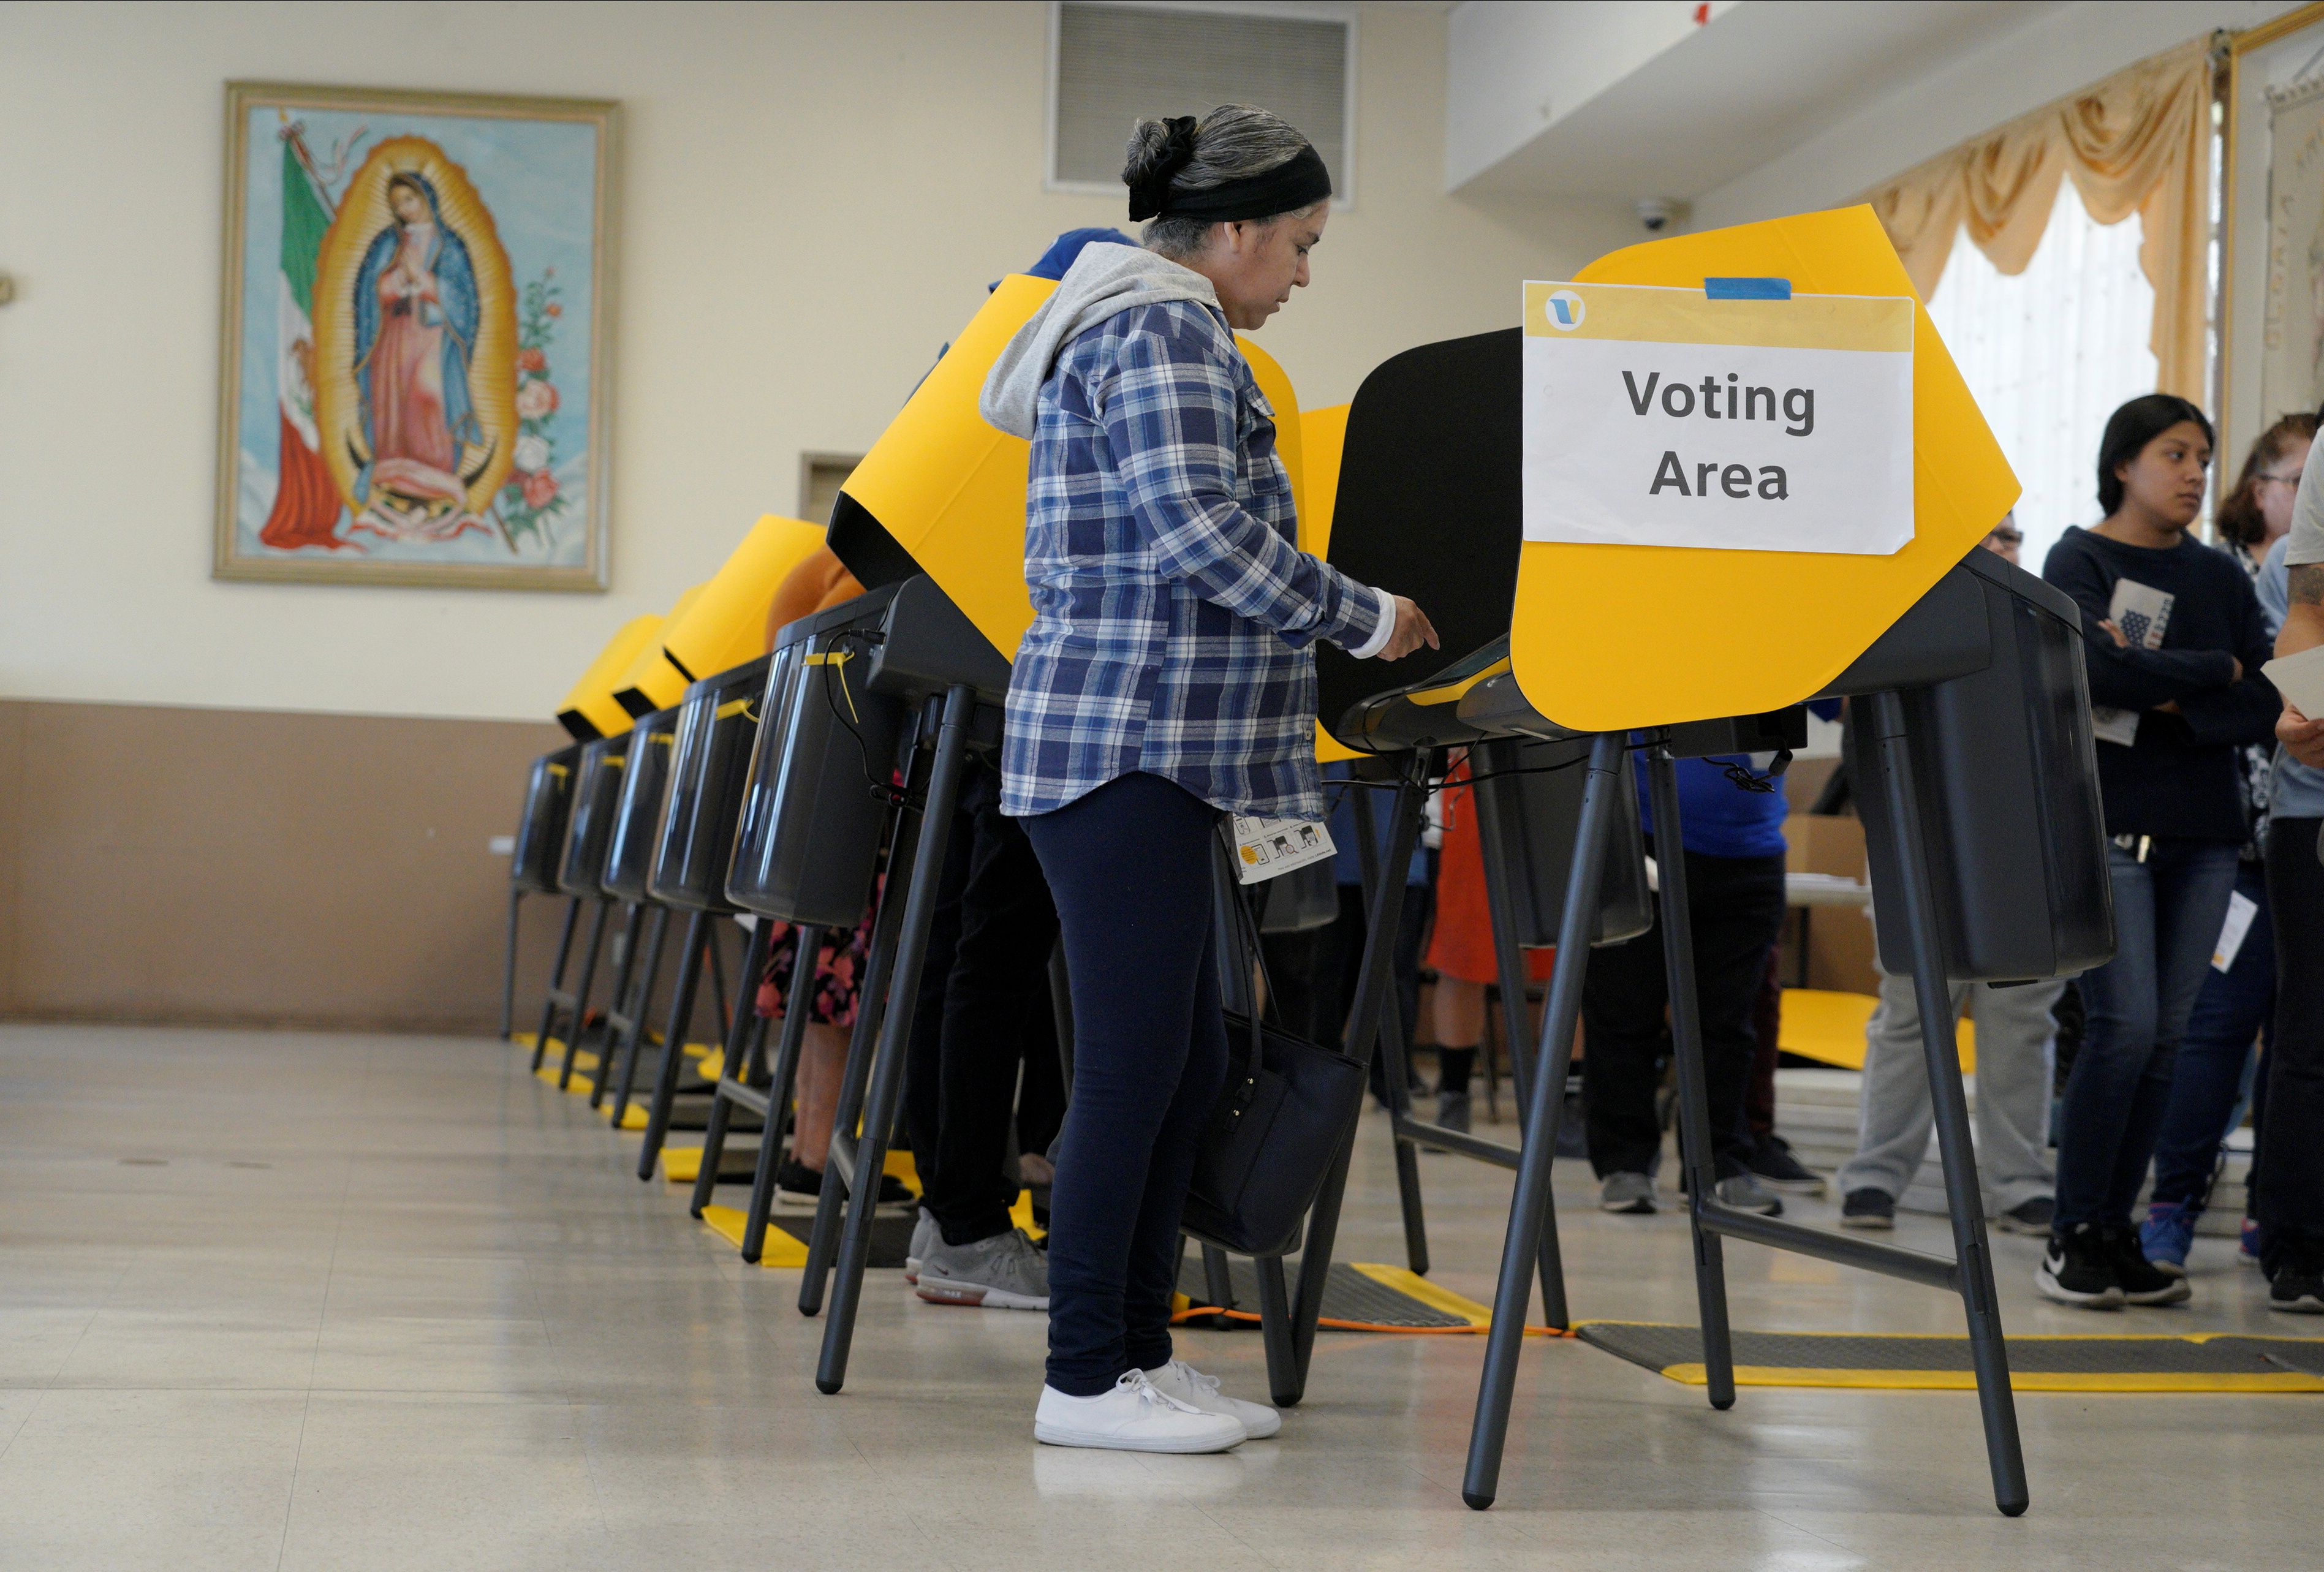 Voters make their choices for Democratic presidential nominee during Super Tuesday elections at a polling place inside Assumption Church in the Boyle Heights neighborhood of Los Angeles, California, U.S., March 3, 2020. REUTERS/Kyle Grillot